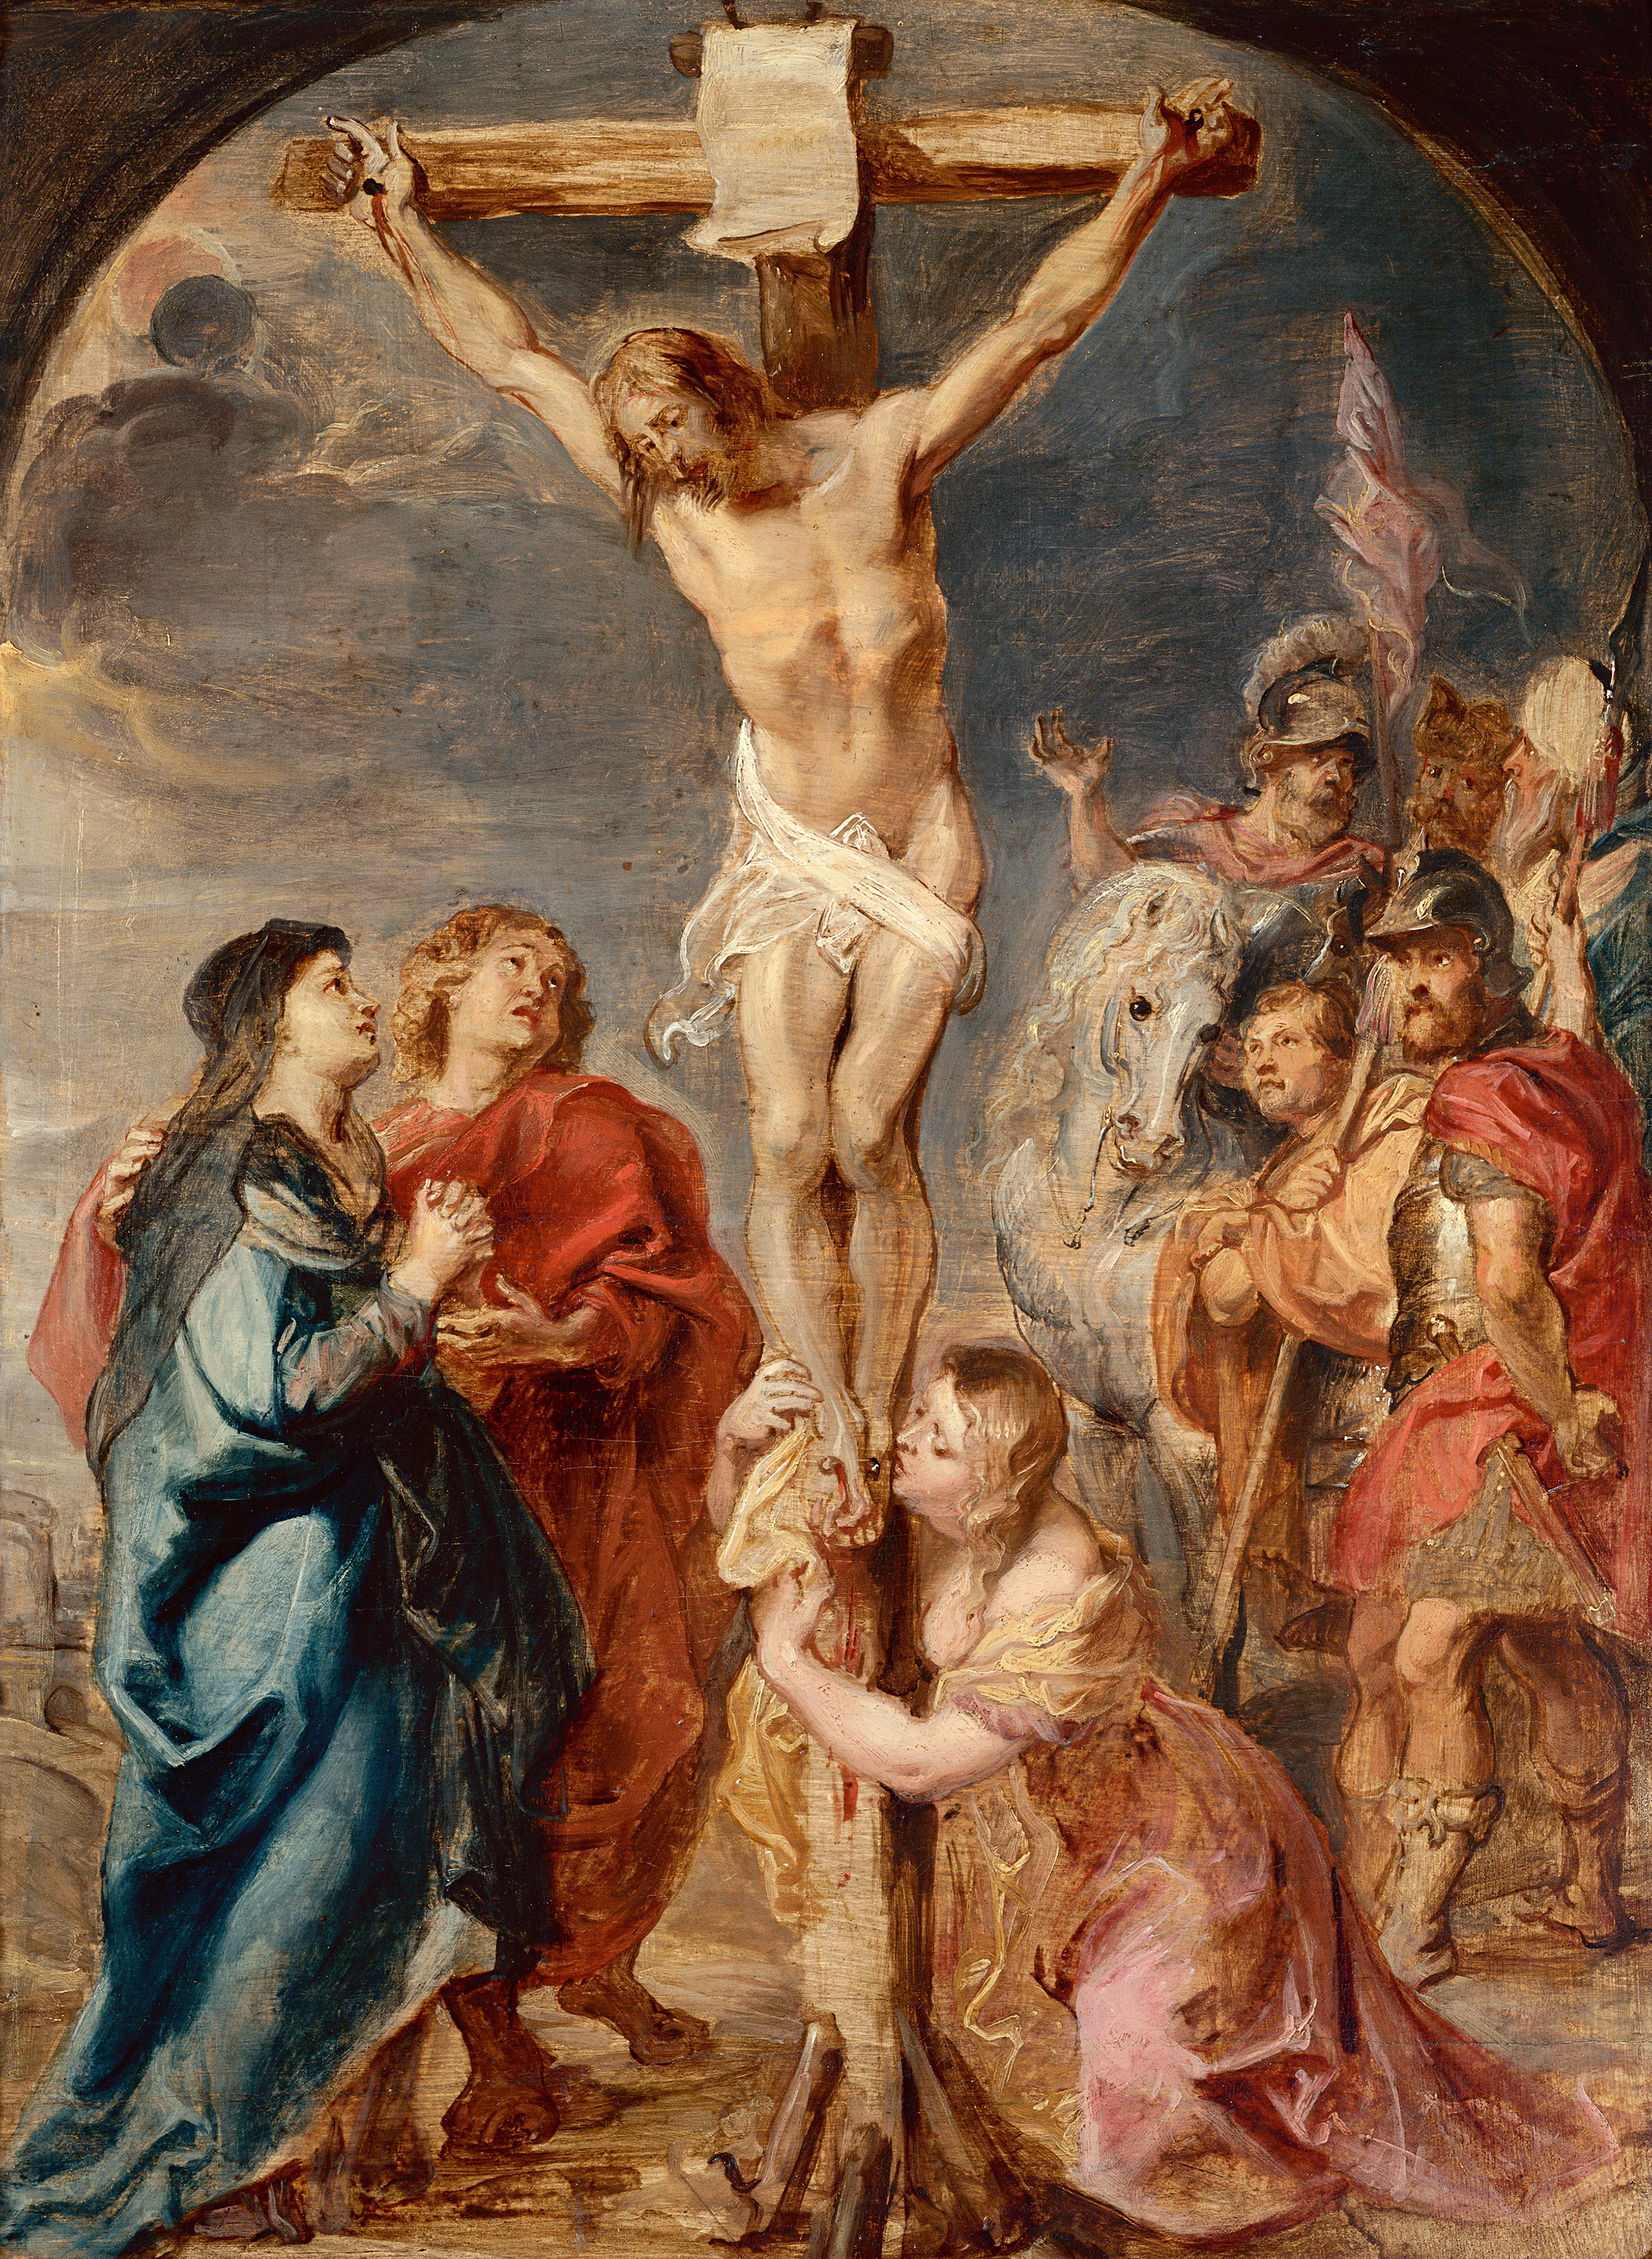 Christ on the Cross Addressing His Mother, St John and St Mary Magdalen